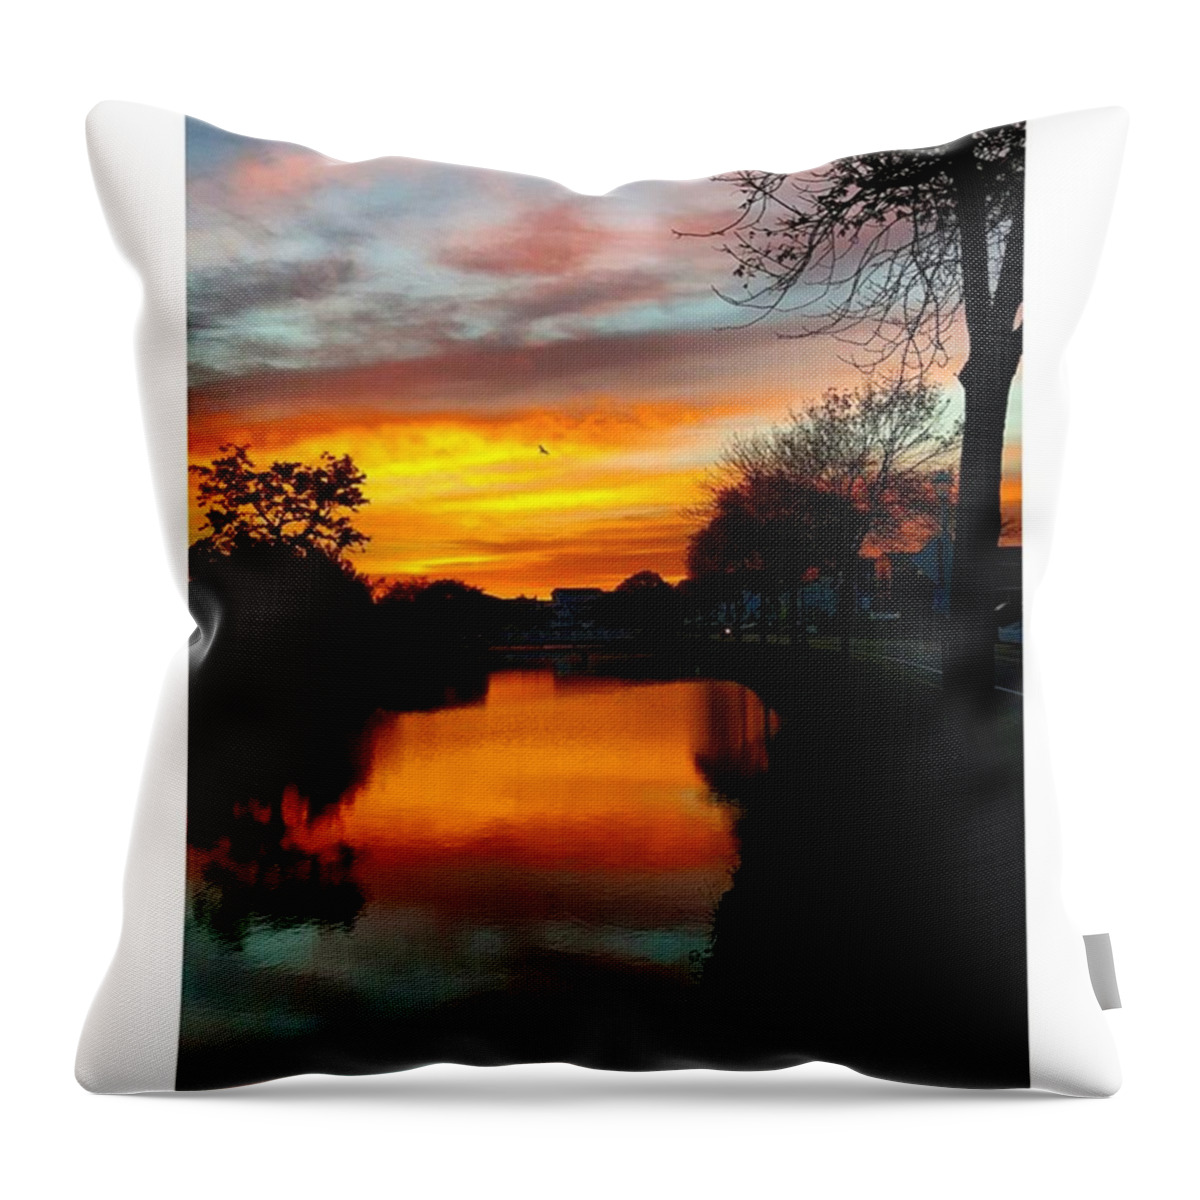 Reflection Throw Pillow featuring the photograph Colors Over The Lake by Lauren Fitzpatrick